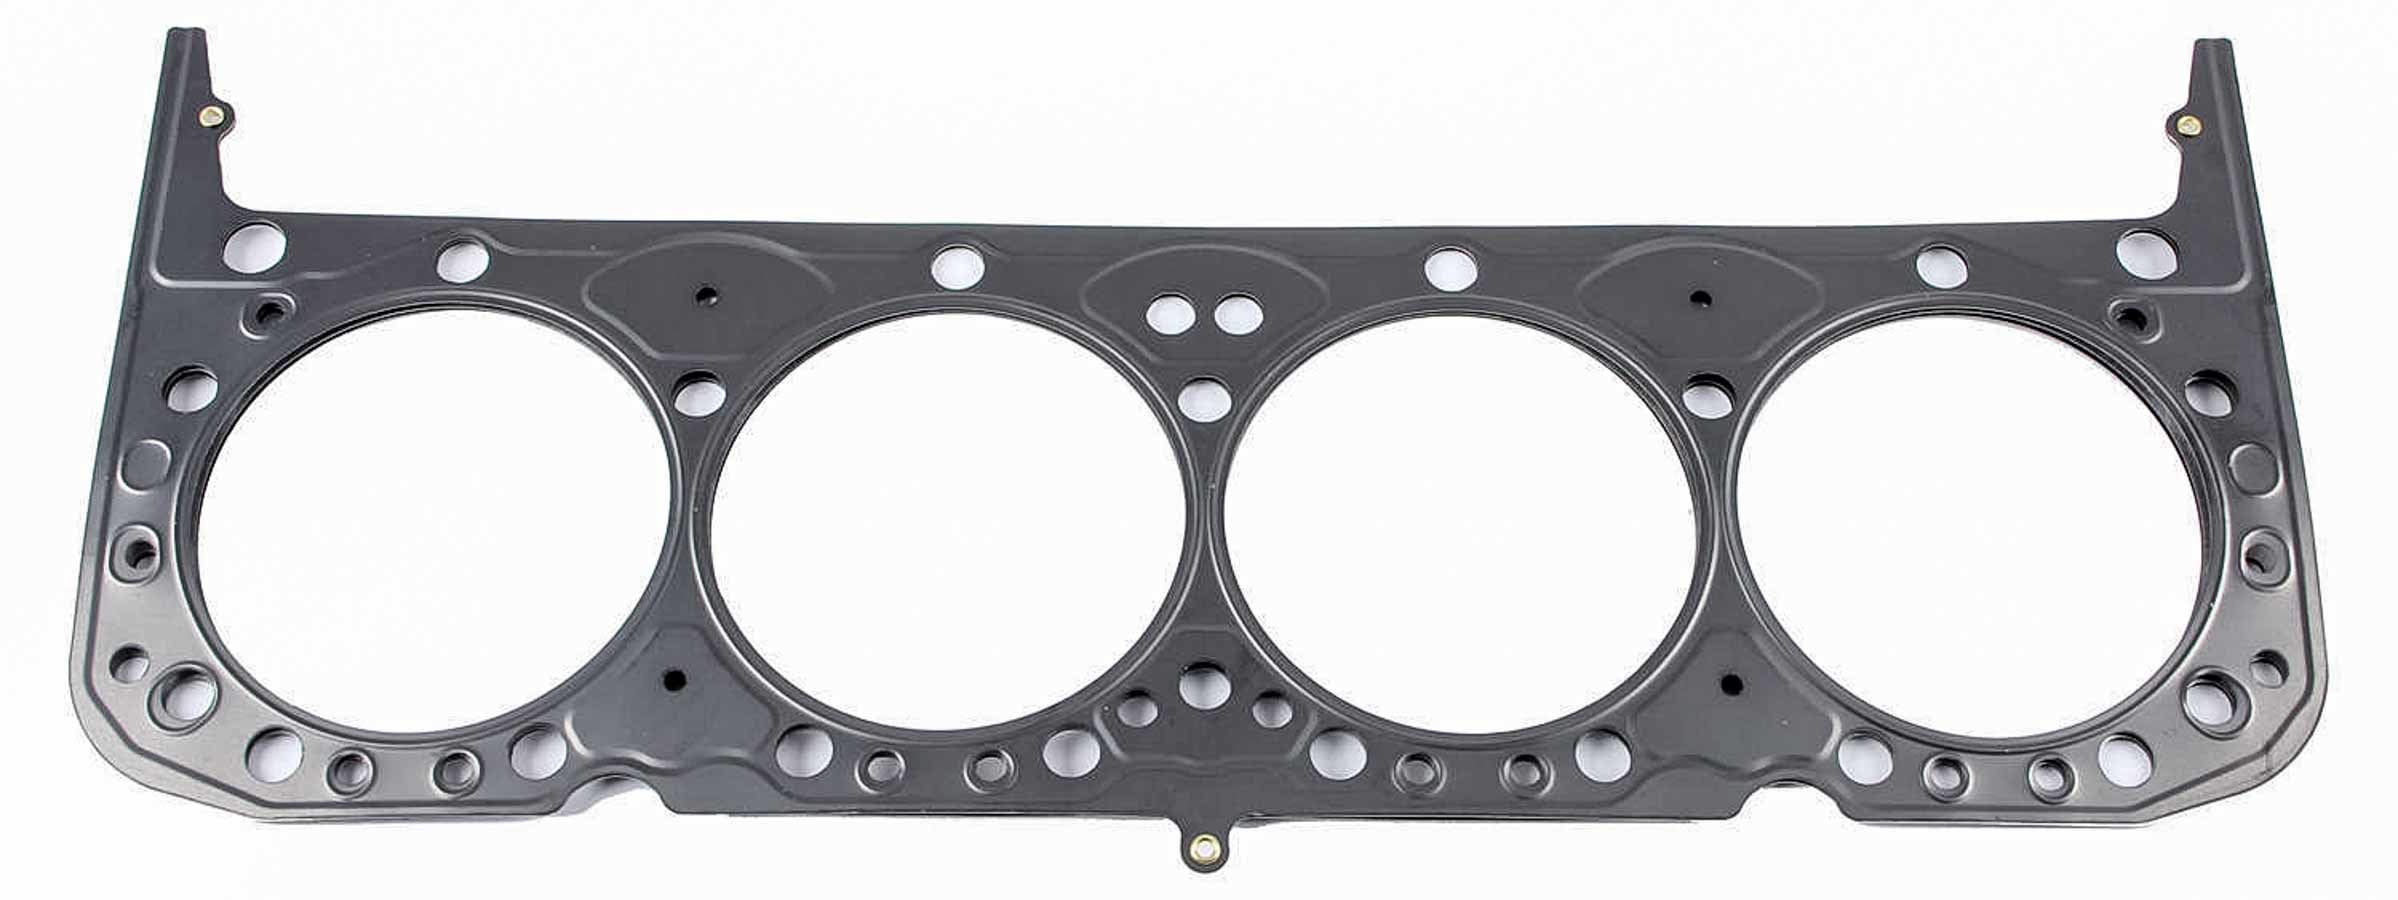 Cometic Gasket C5554-040 MLS .040 Thickness 4.040 Head Gasket for Small Block Mopar 5.2/5.9L 